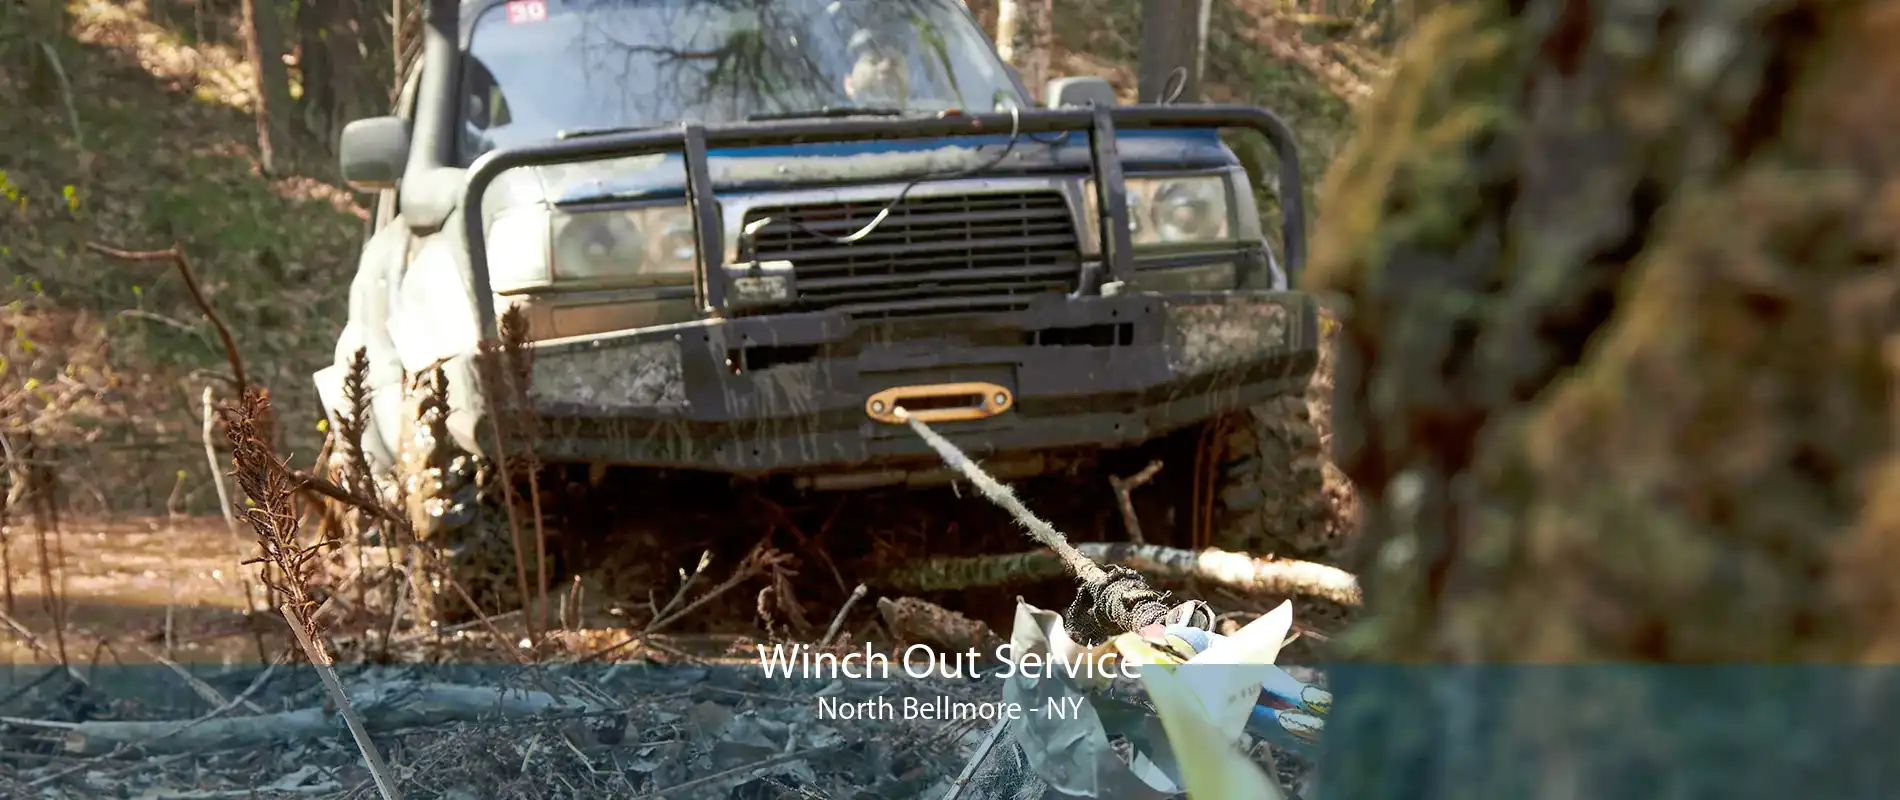 Winch Out Service North Bellmore - NY